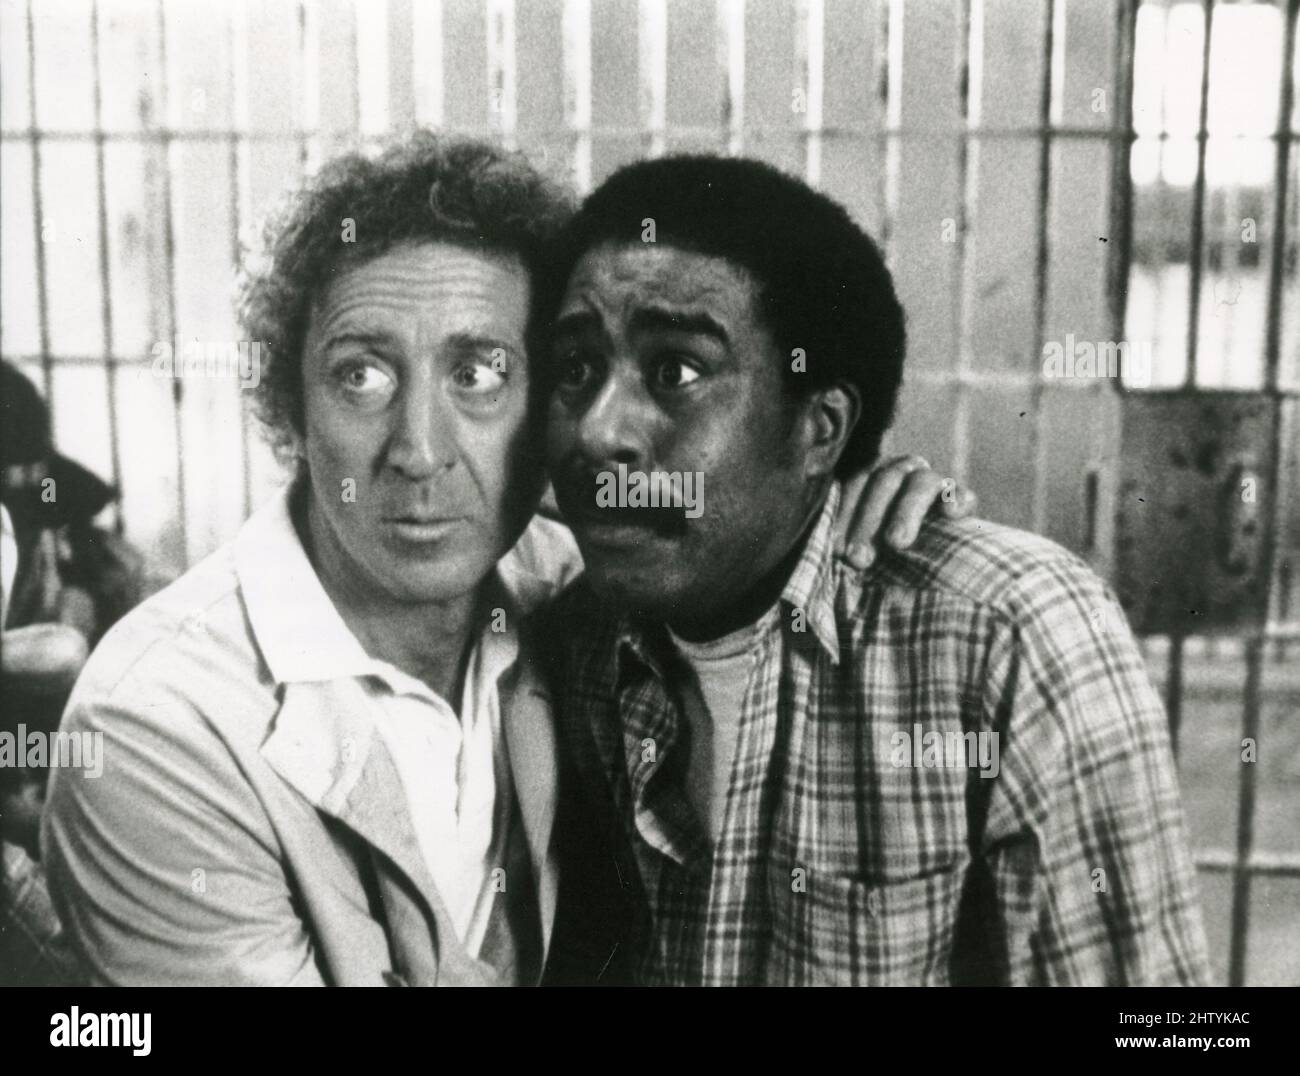 American comedians Gene Wilder and Richard Pryor in the movie Stir Crazy, USA 1980 Stock Photo